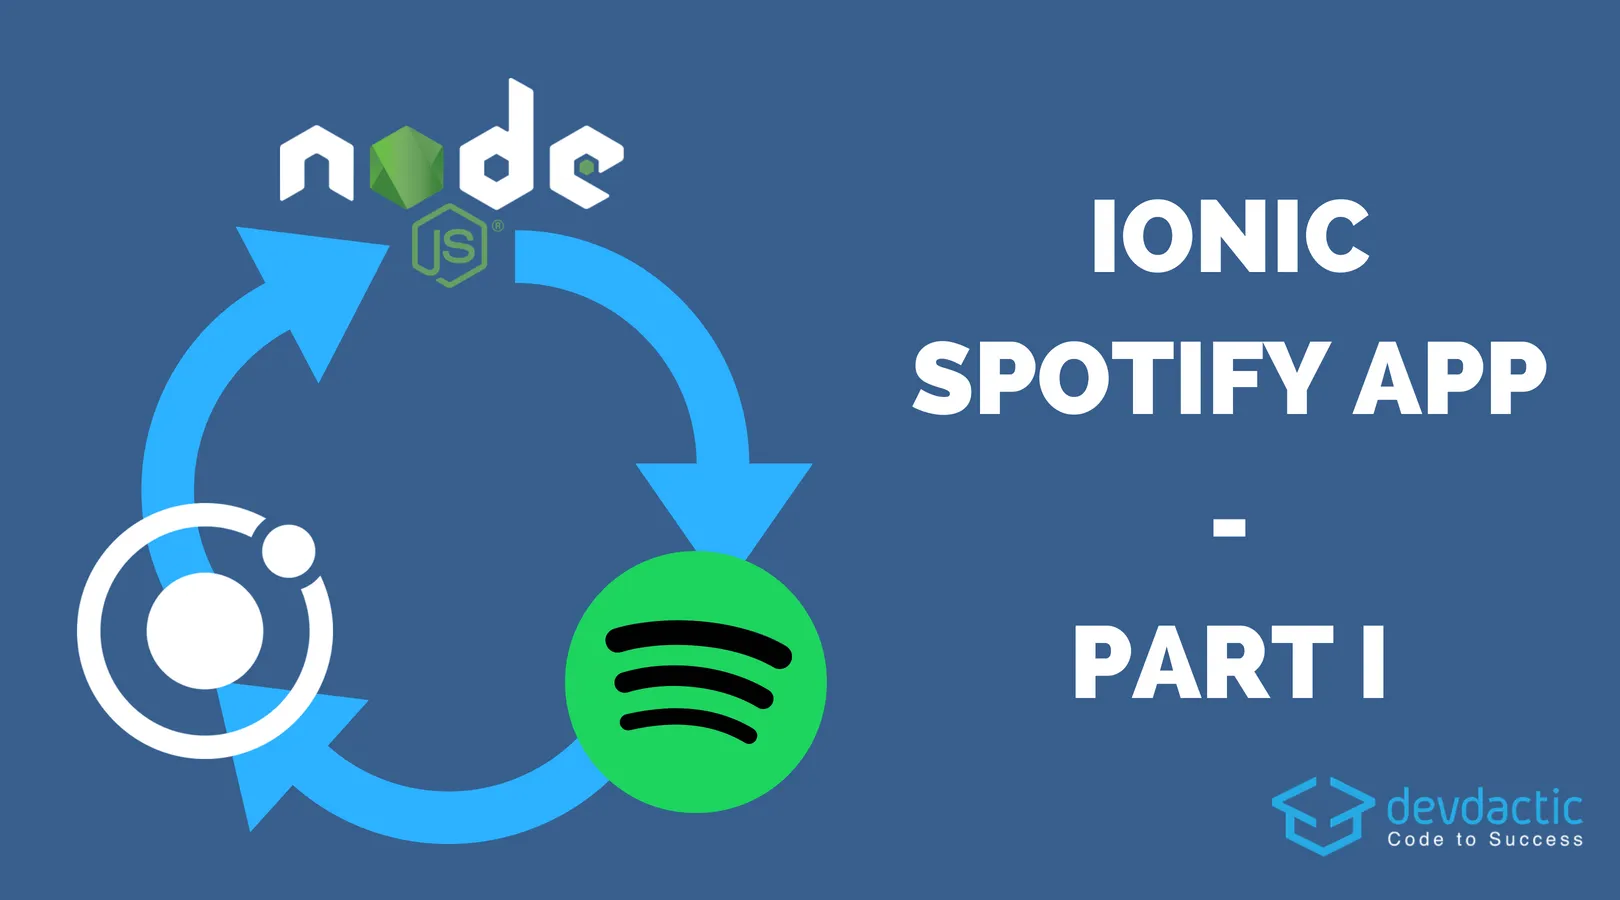 Building an Ionic Spotify App - Part 1: OAuth